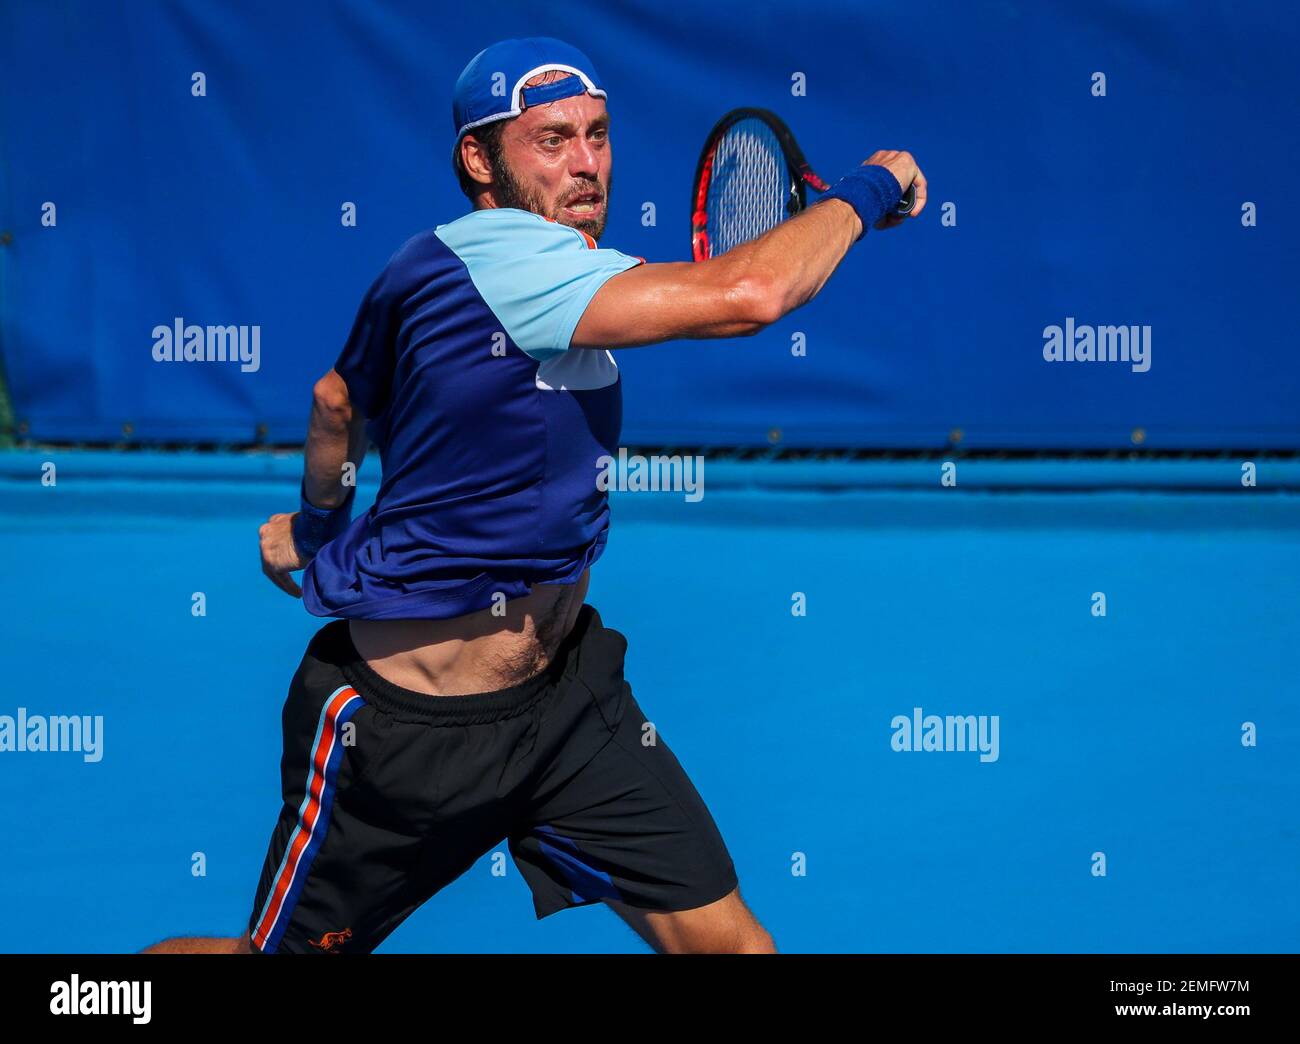 February 2l, 2019: Paolo Lorenzi, of Italy, in action against Steve  Johnson, of the United States, during a quarterfinal round of the 2019  Delray Beach Open ATP professional tennis tournament, played at